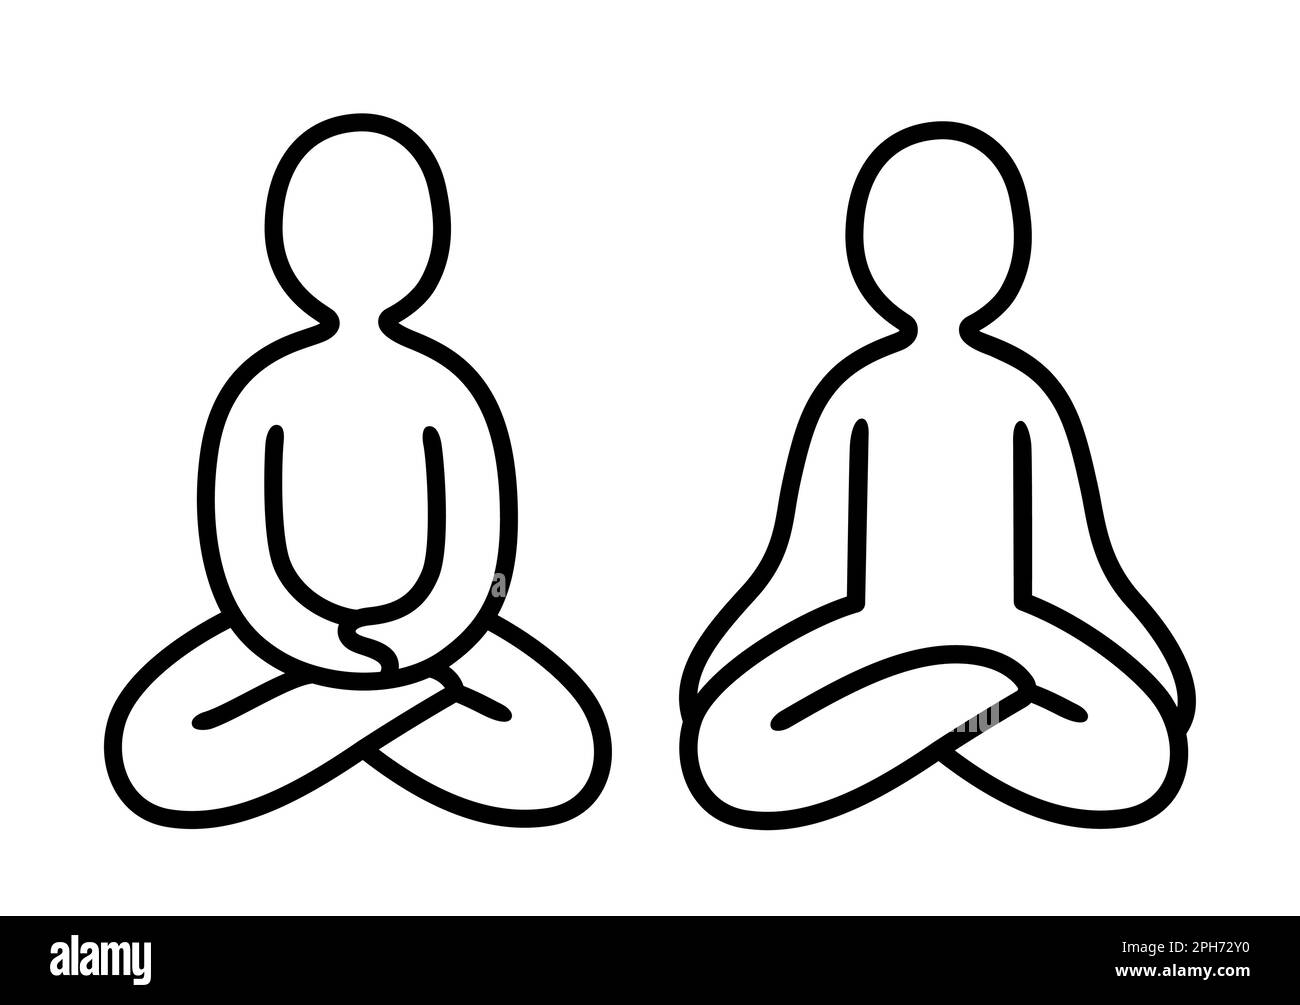 Meditation doodle icon. Simple hand drawn figure sitting cross legged with hands on knees and in lap. Line art vector illustration, minimal Zen drawin Stock Vector